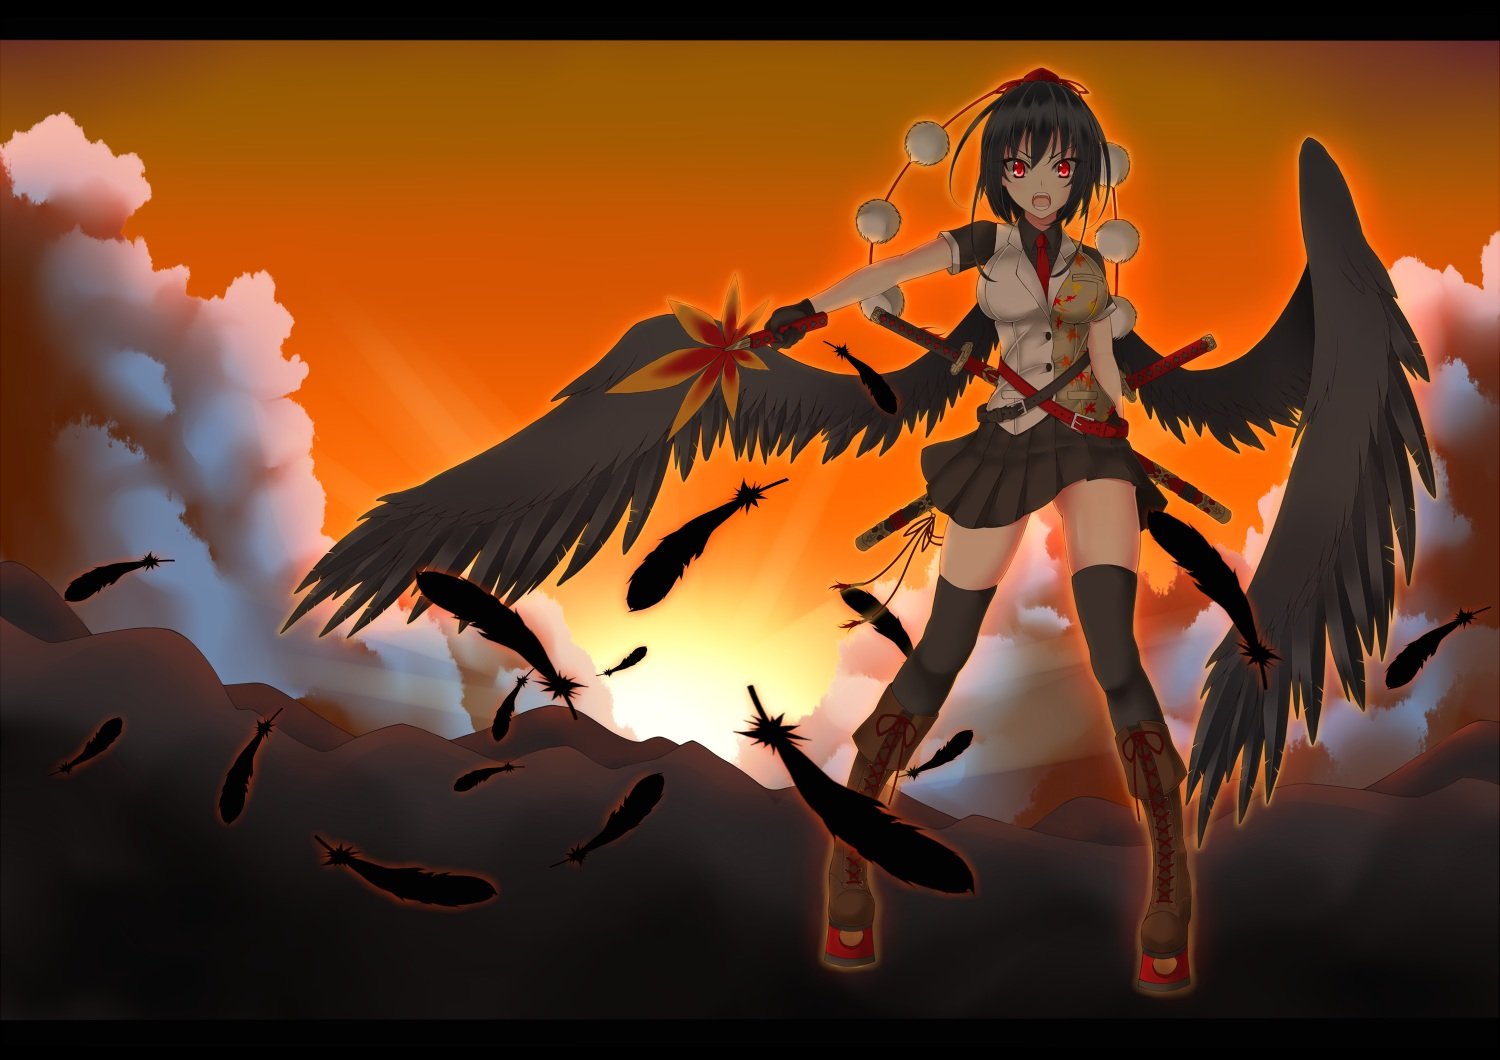 touhou, Black, Hair, Boots, Clouds, Fan, Feathers, Gloves, Gmot, Hat, Red, Eyes, Shameimaru, Aya, Short, Hair, Skirt, Sunset, Sword, Thighhighs, Tie, Touhou, Weapon, Wings Wallpaper